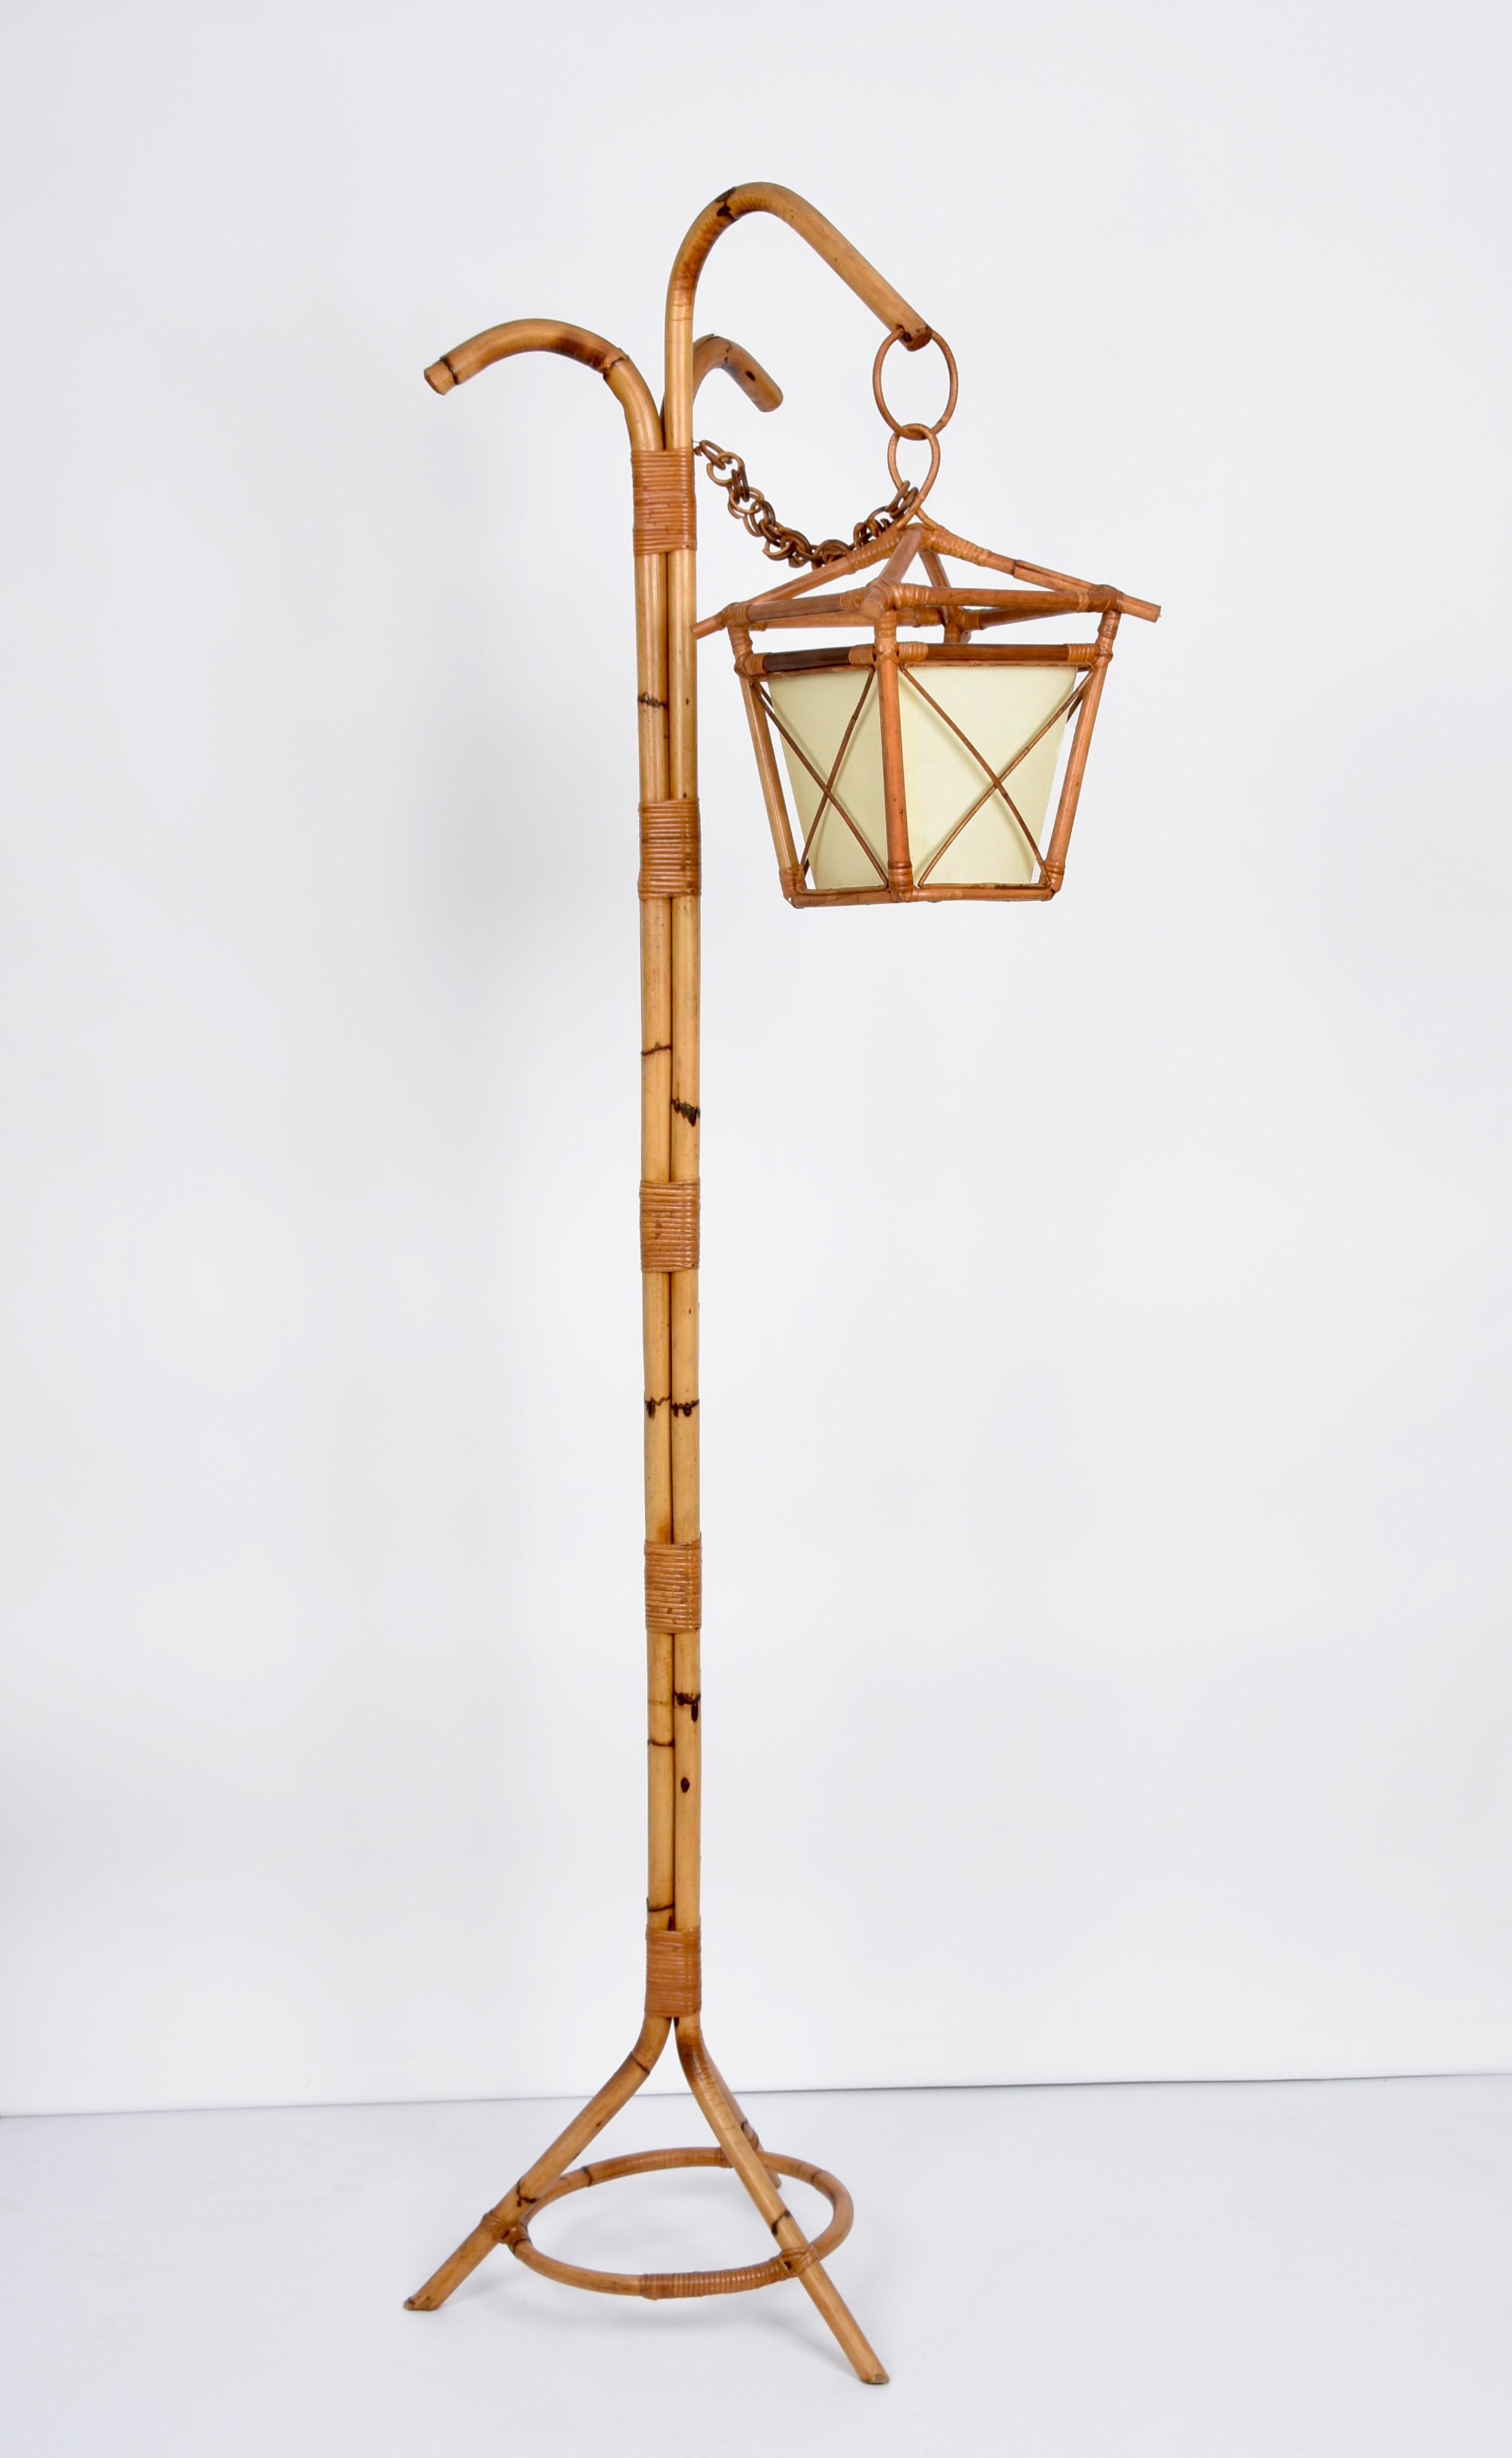 Midcentury Bamboo and Rattan Italian Floor Lamp with Tripod Base, 1950s For Sale 5